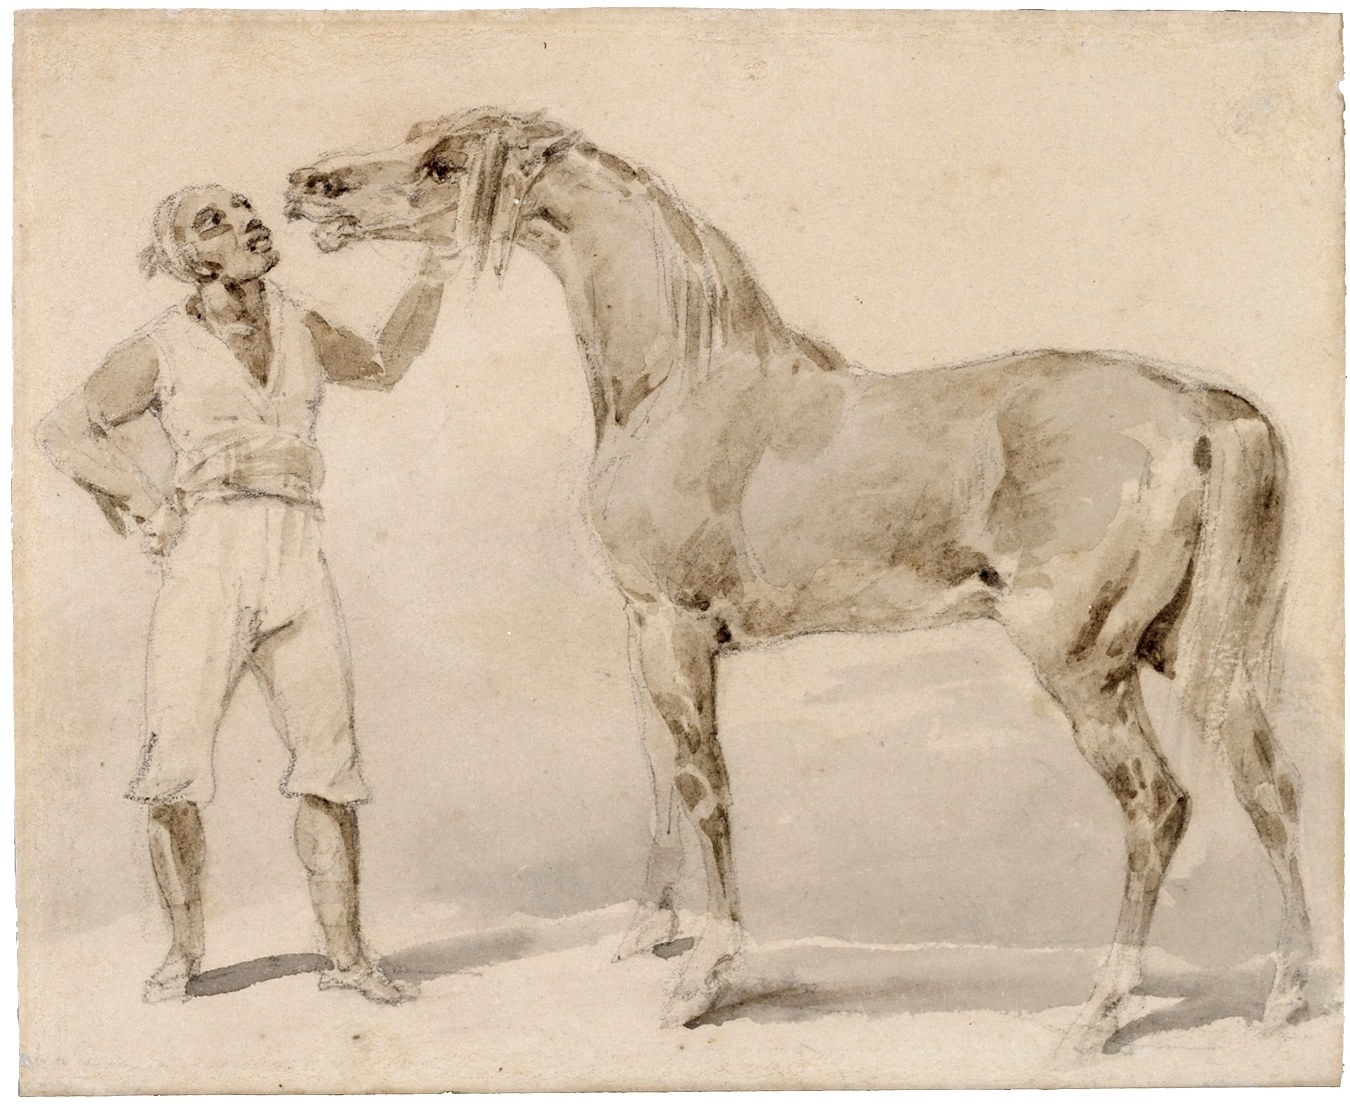 Th&eacute;odore G&eacute;ricault  Groom Presenting a Horse, 1823  Watercolor, brush and ink, with pencil on paper 3 5/8 x 4 1/2 inches